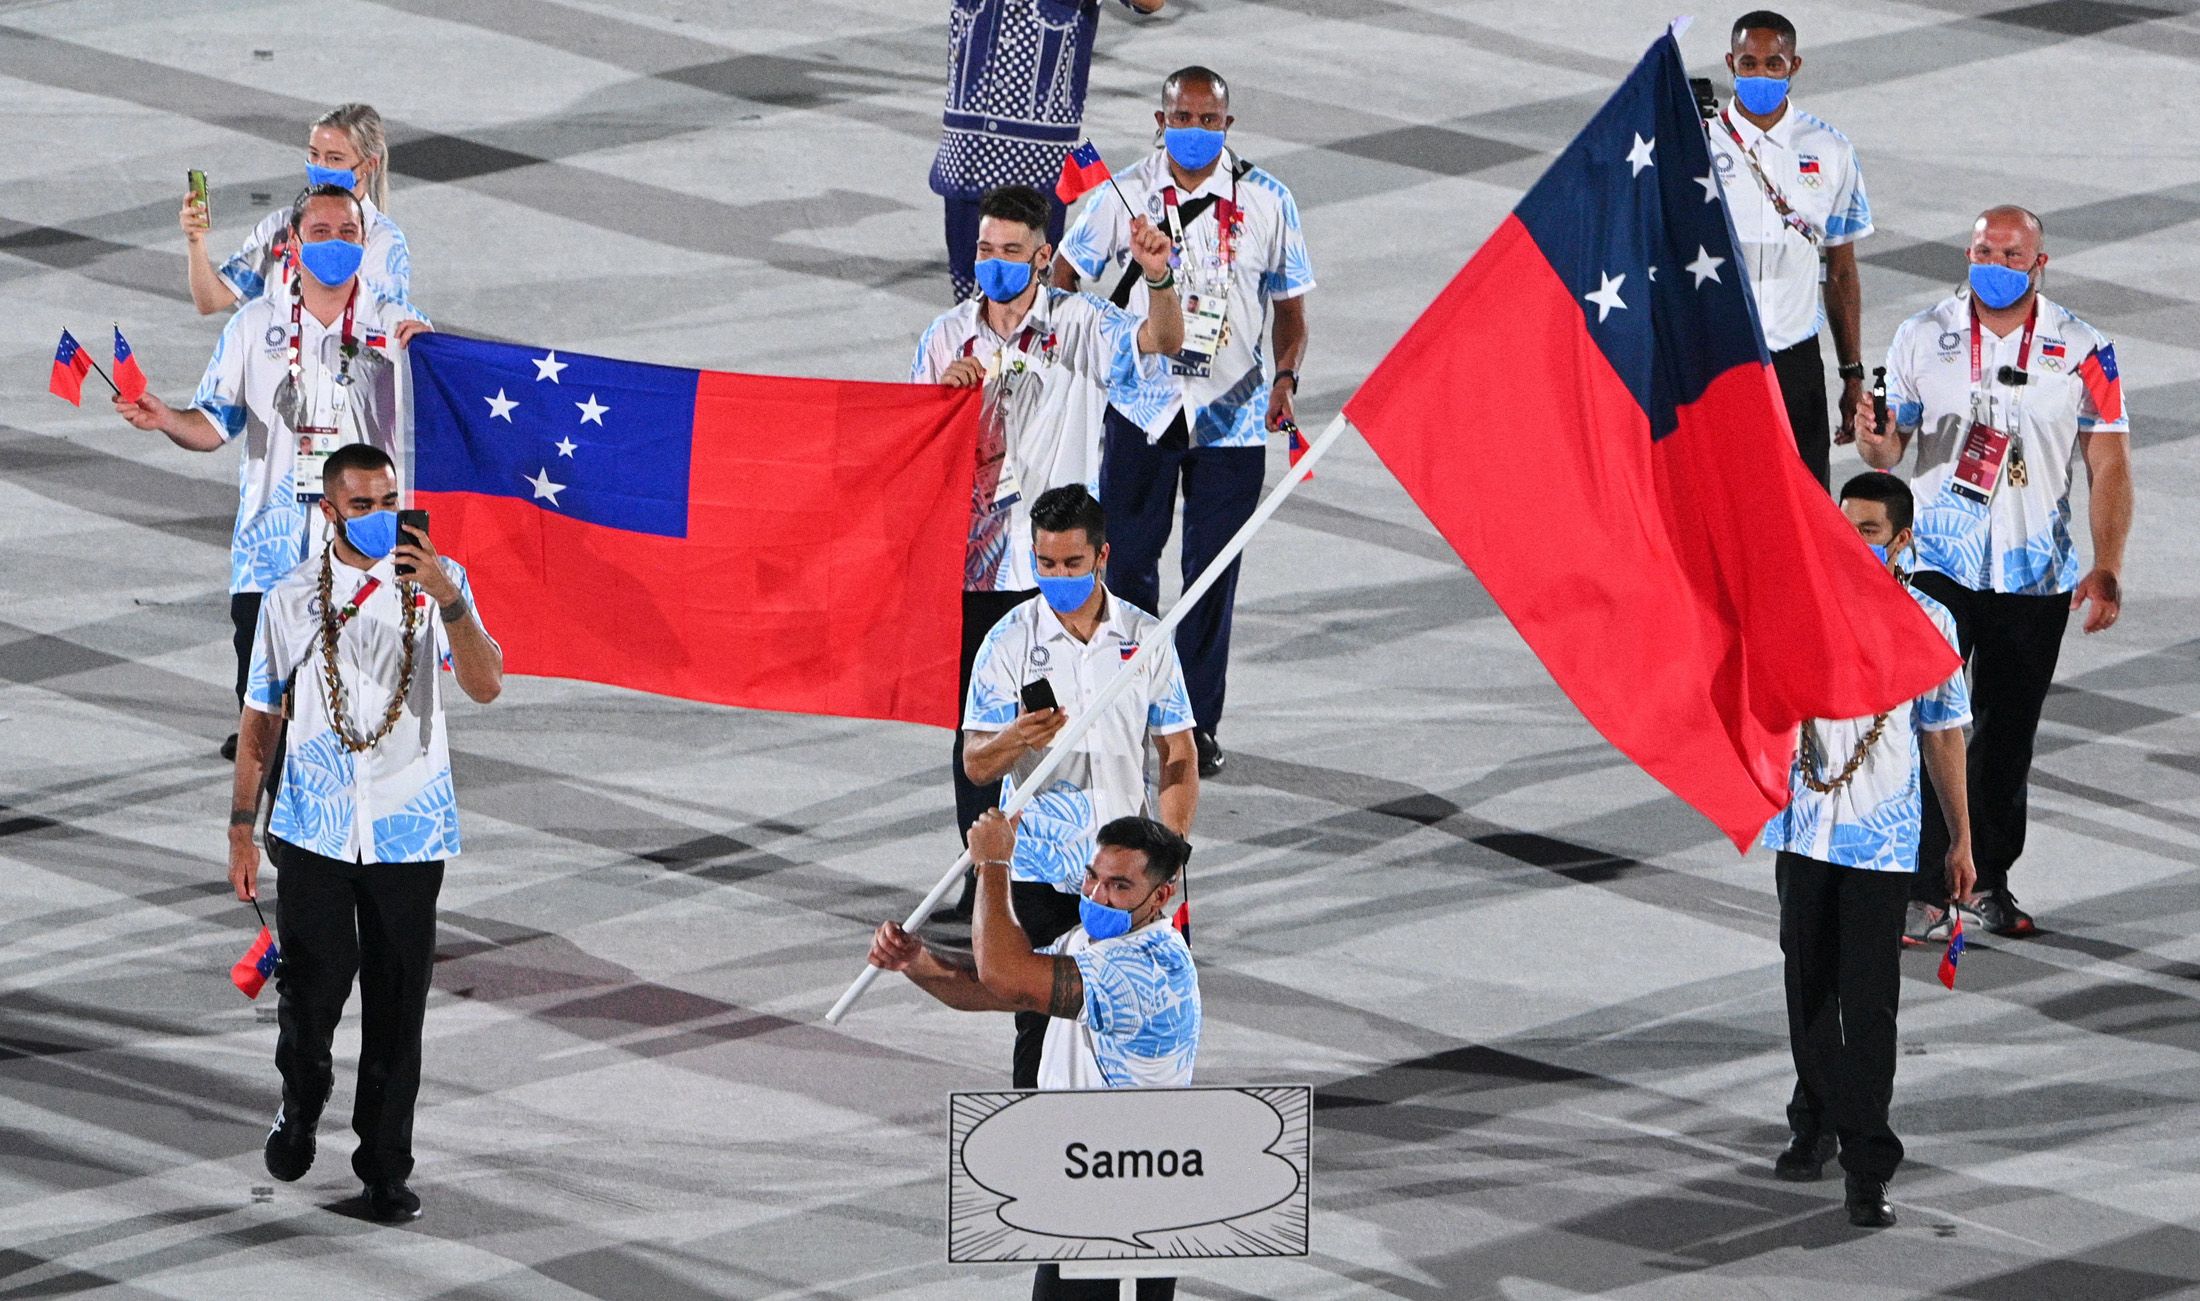 Alex Rose carries Samoa's flag at the Tokyo Olympics opening ceremony